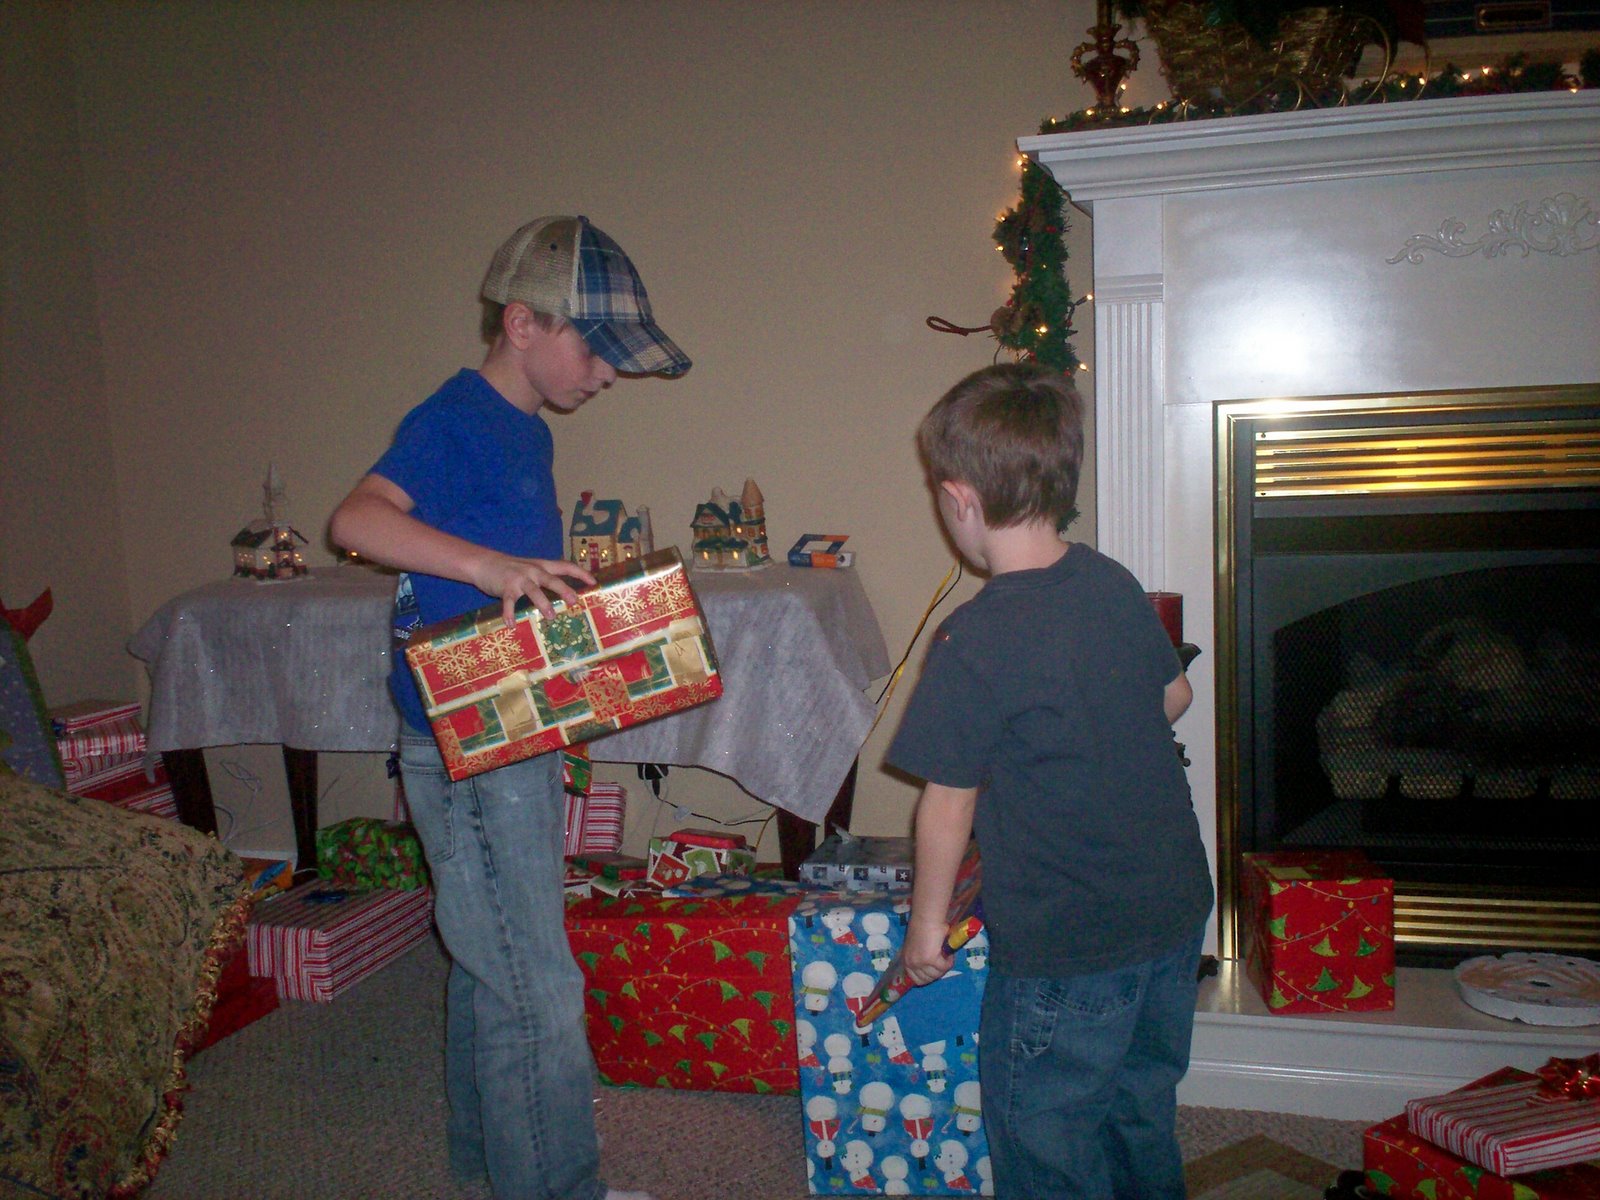 [bub+and+noah+handing+out+presents.jpg]